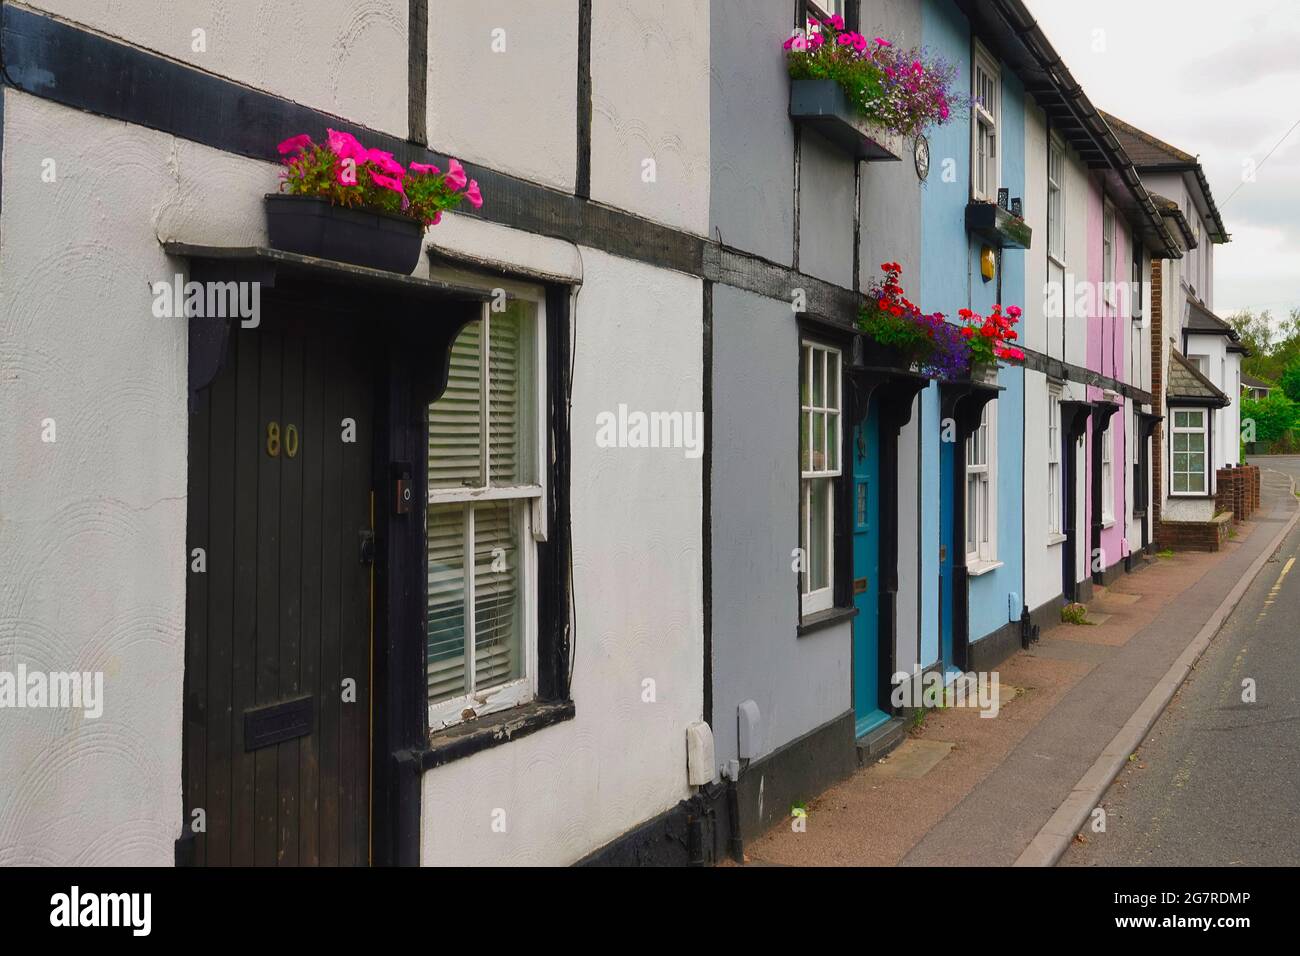 Traditional English olde world cottages painted in multi colours with floral hanging baskets - seen in Surrey UK Stock Photo